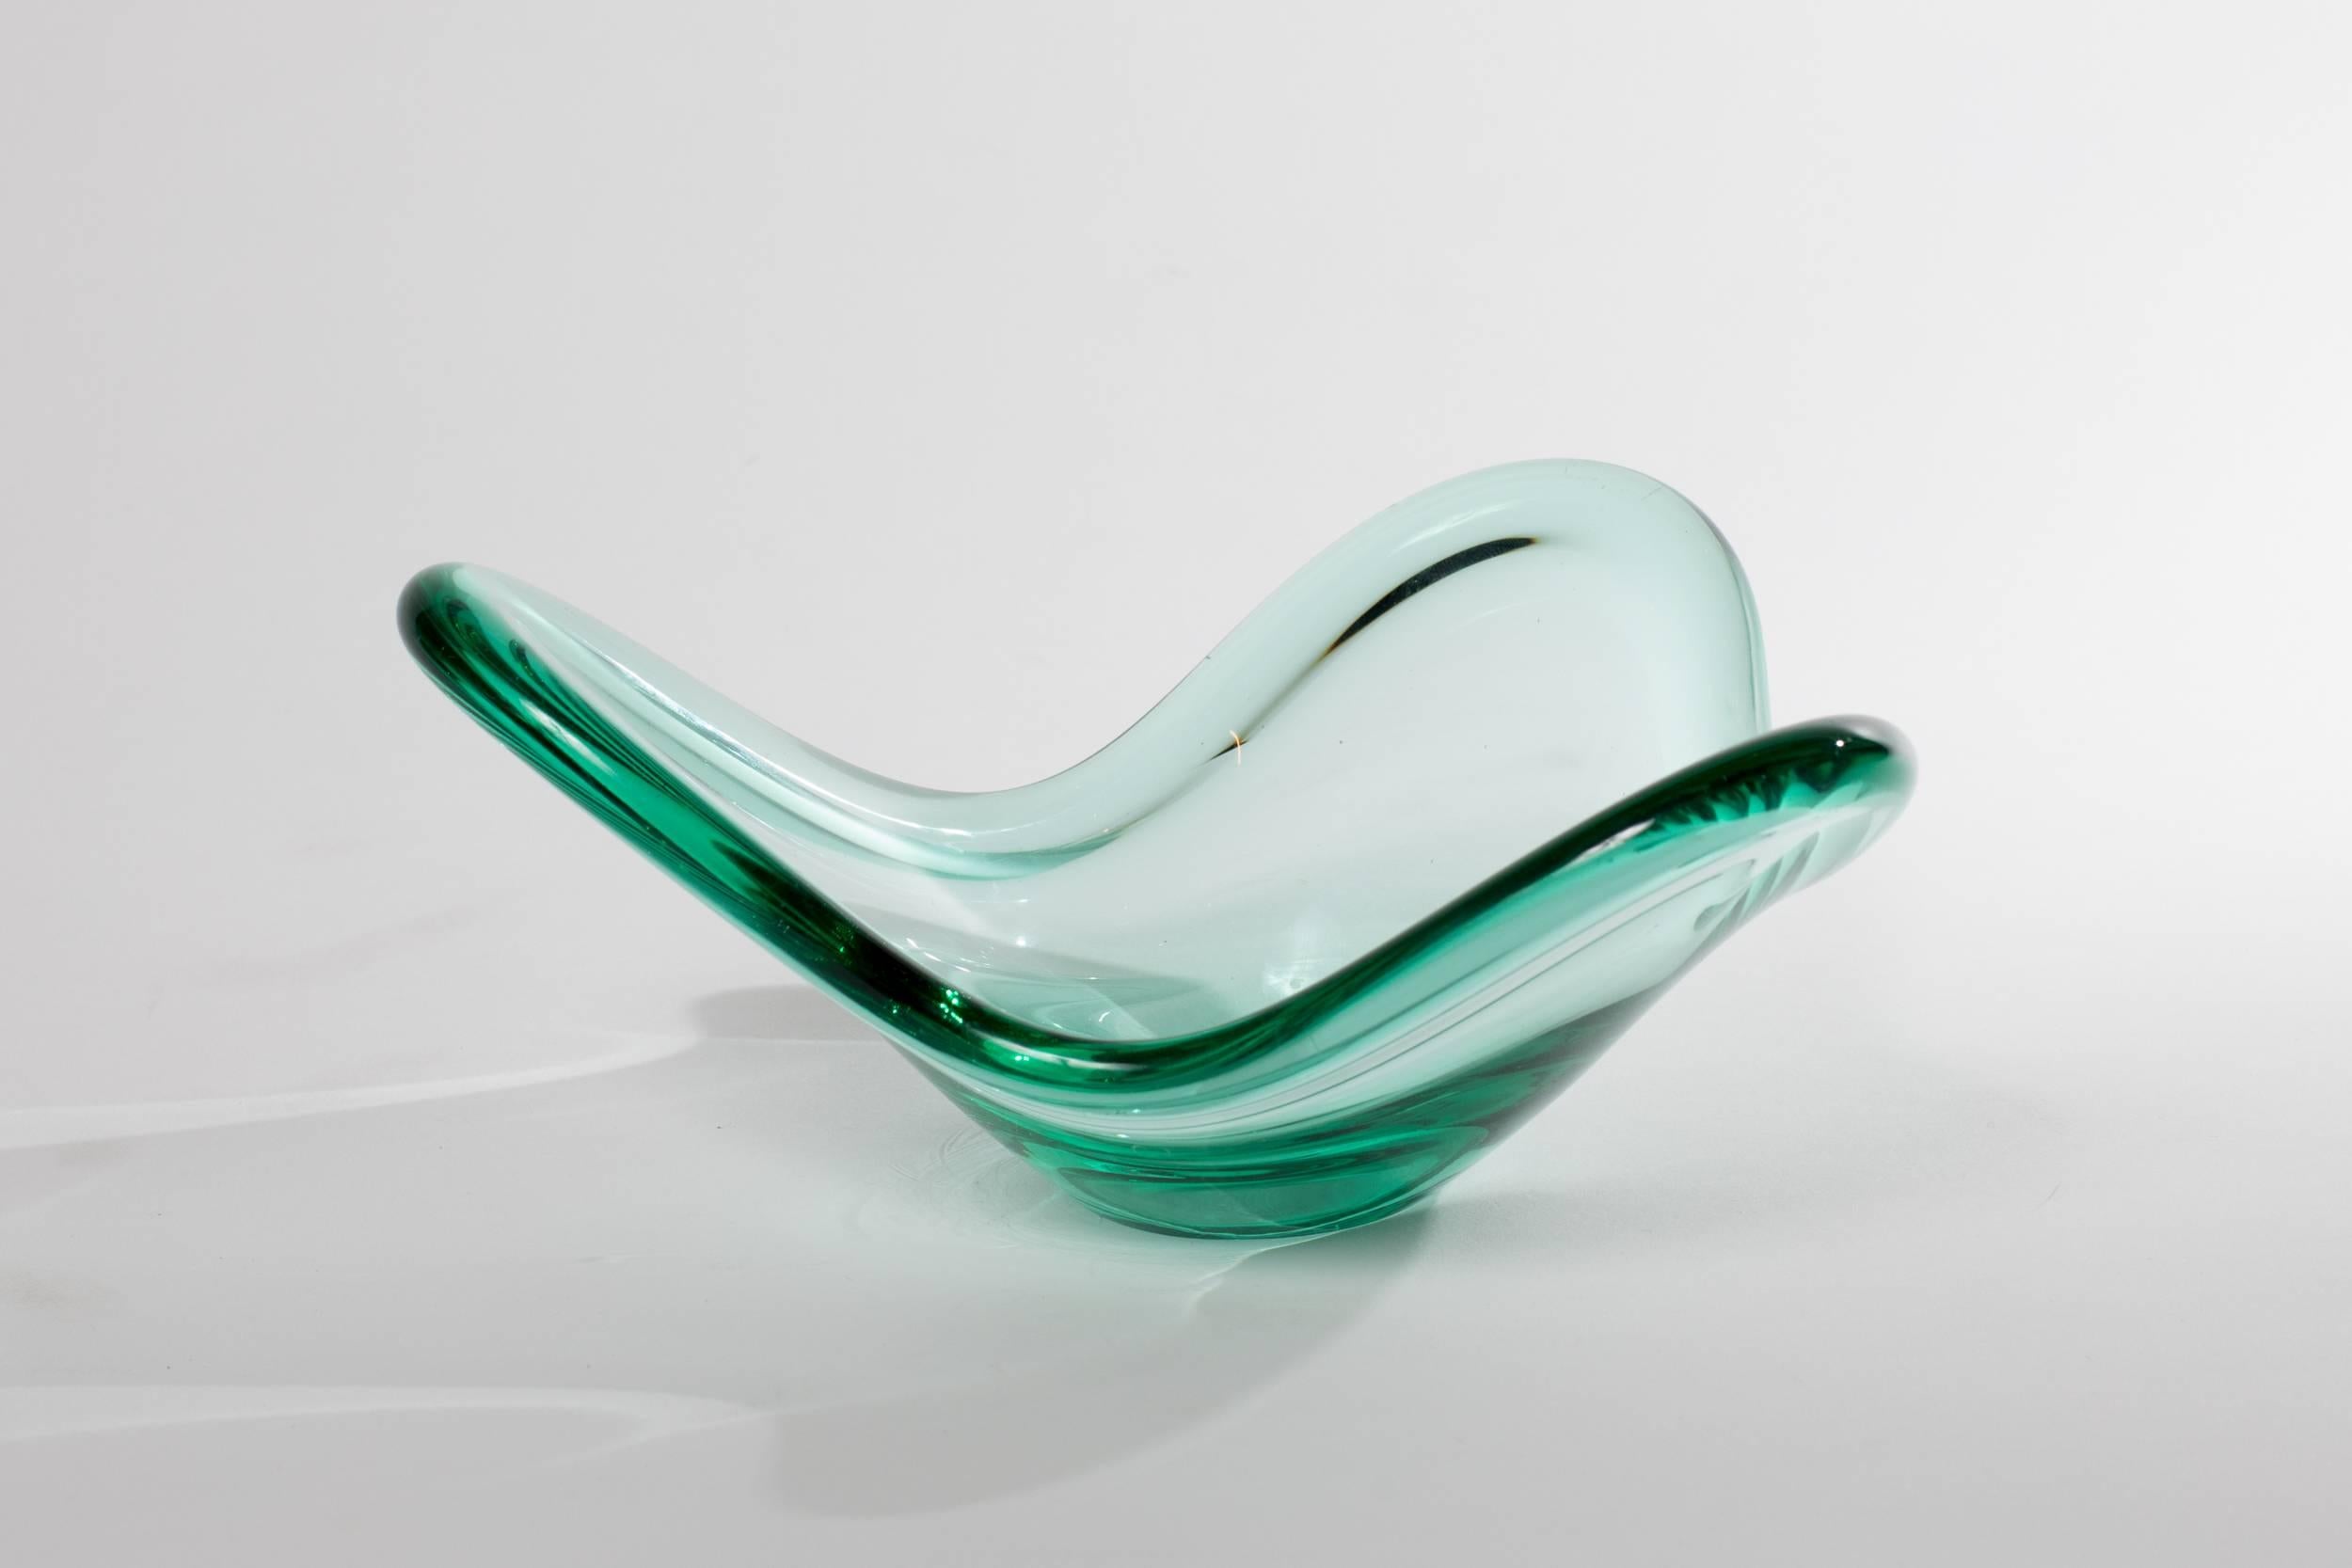 Holmegaard biomorphic glass bowl by Per Lutken. Etched signature at the base.